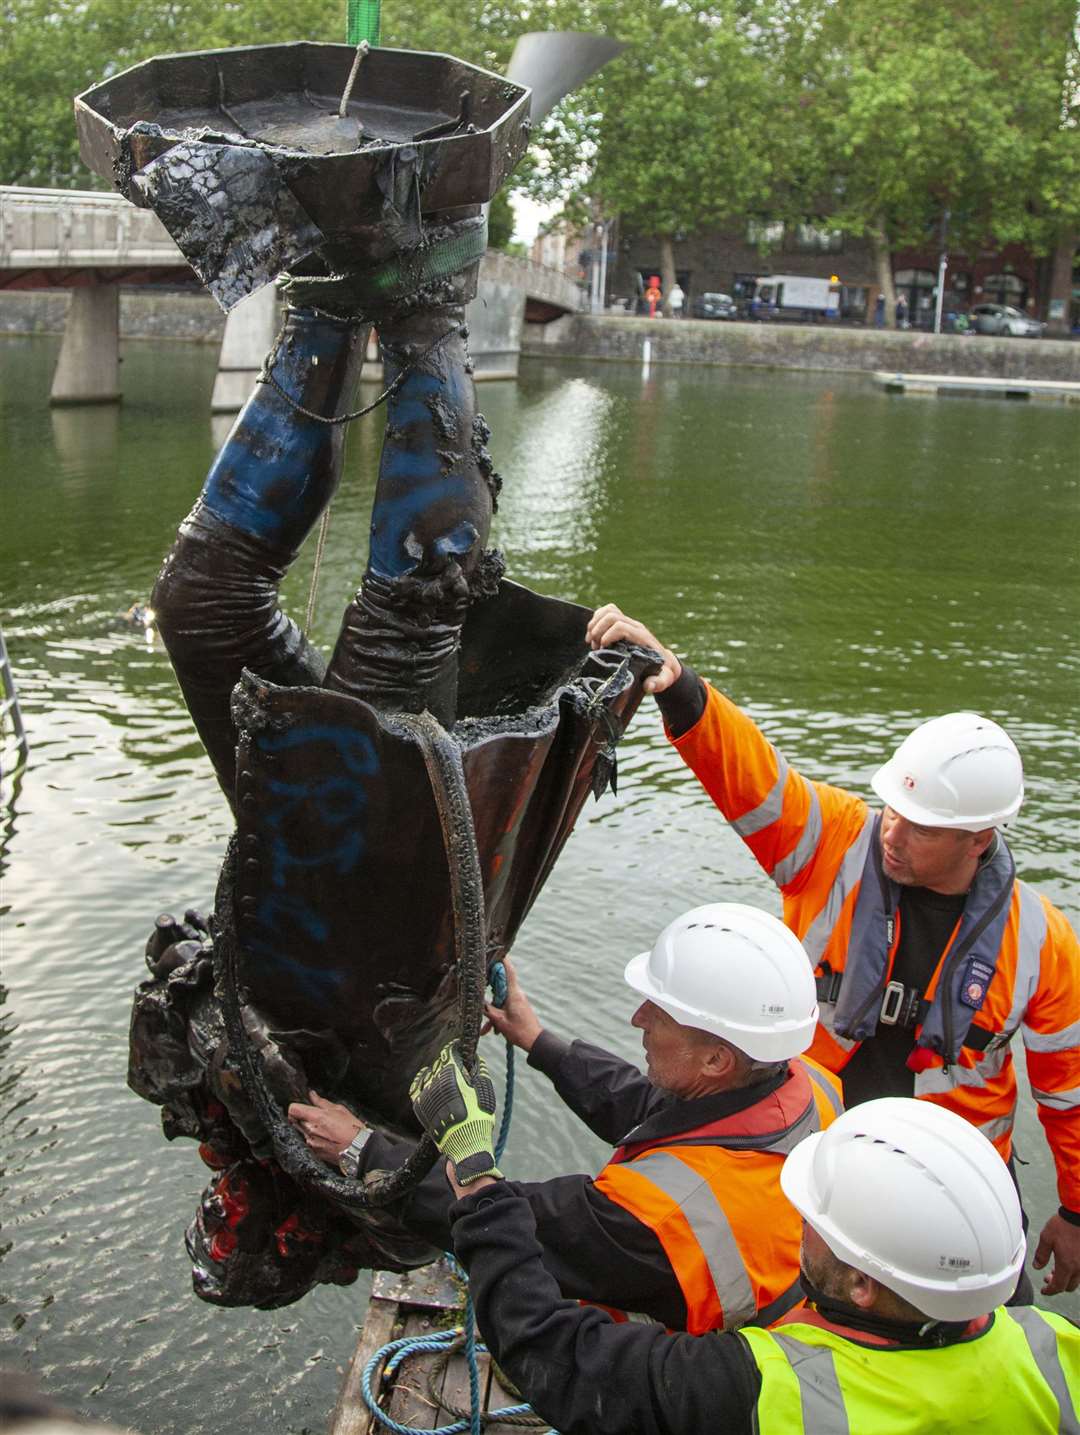 The statue of Edward Colston is removed from Bristol Harbour (Bristol City Council/PA)